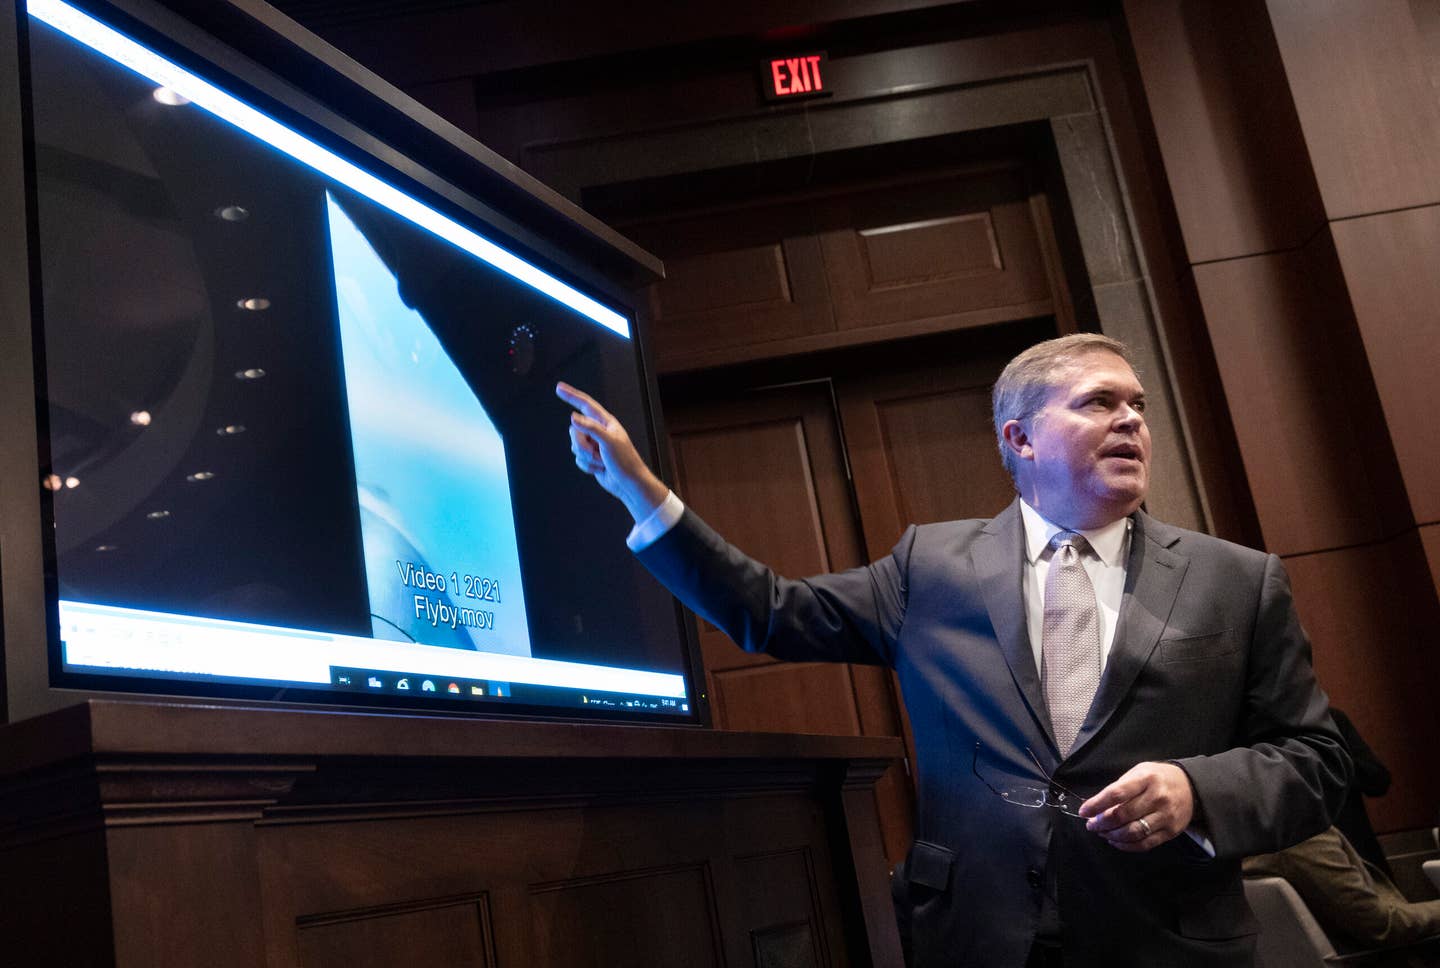 WASHINGTON, DC - MAY 17: U.S. Deputy Director of Naval Intelligence Scott Bray explains a video of unidentified aerial phenomena, as he testifies before a House Intelligence Committee subcommittee hearing at the U.S. Capitol on May 17, 2022, in Washington, DC. The committee met to investigate Unidentified Aerial Phenomena, commonly referred to as Unidentified Flying Objects (UFOs). (Photo by Kevin Dietsch/Getty Images)